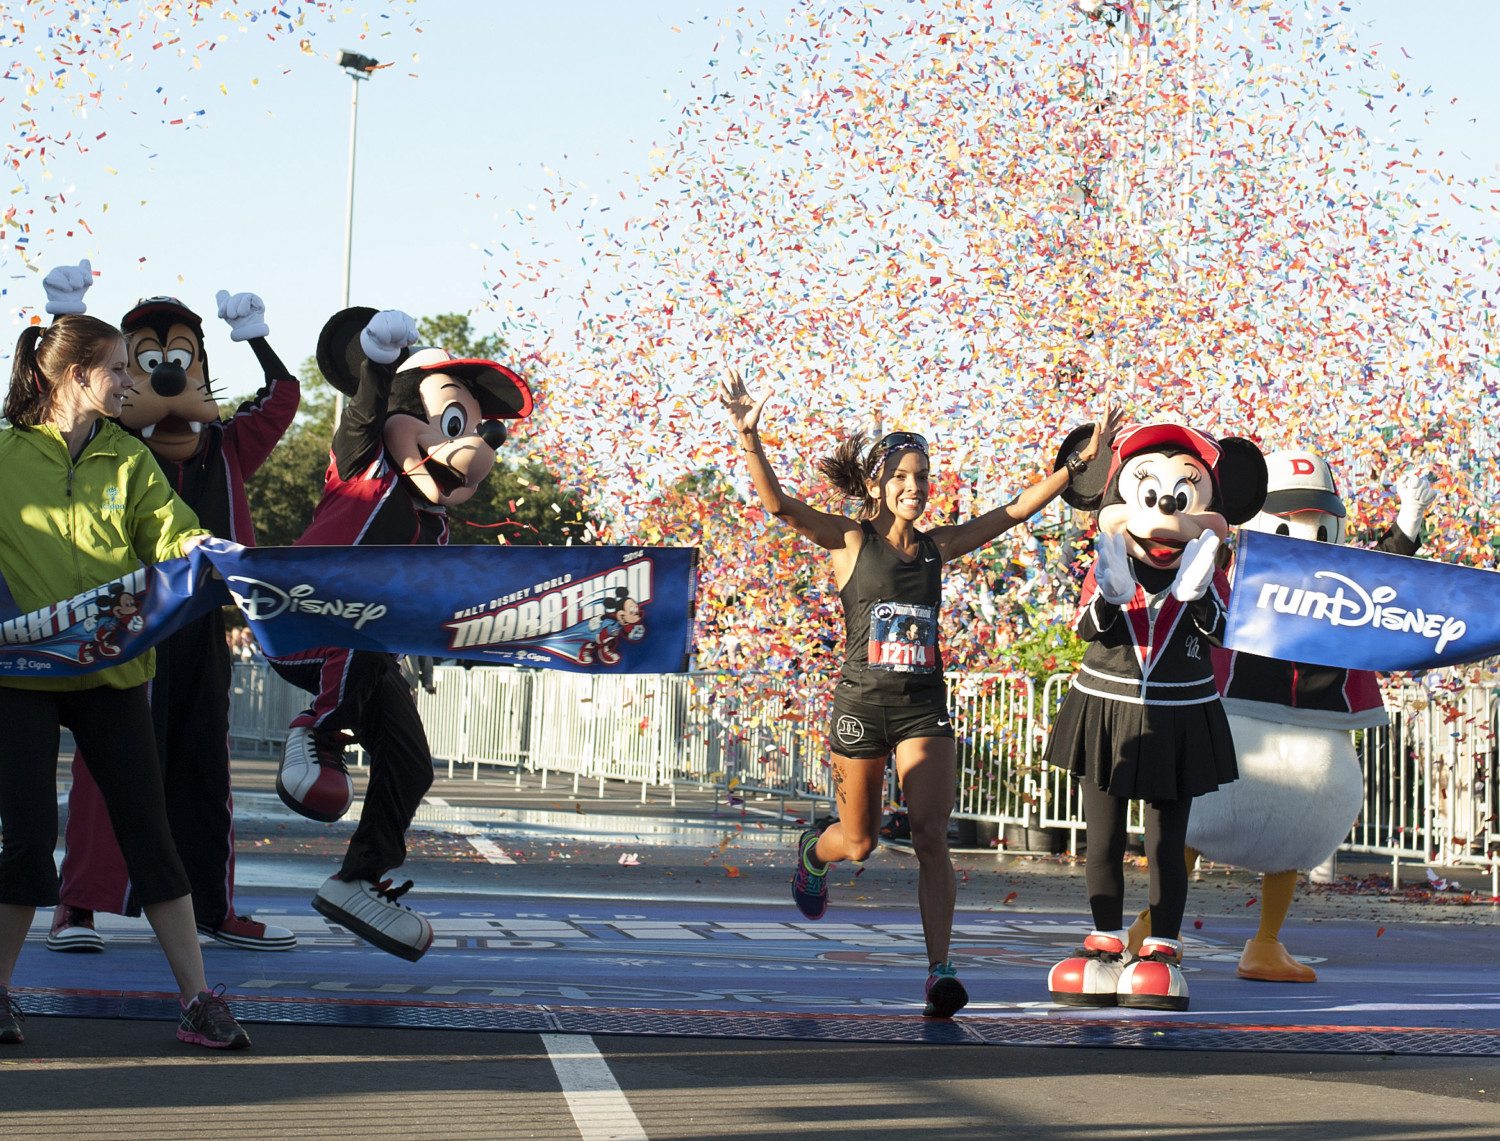 LAKE BUENA VISTA, FL - JANUARY 12: In this handout photo provided by Disney Parks, Angela Brito of Guayaquil, Ecuador crosses the finish line with an official time of 2:47:44 at the 2014 Walt Disney World Marathon presented by runDisney on January 12, 2014 in Lake Buena Vista, Florida. The 26.2 mile race goes through all four Walt Disney World theme parks capping off running events throughout the weekend. (Photo by Preston Mack/Disney Parks via Getty Images)